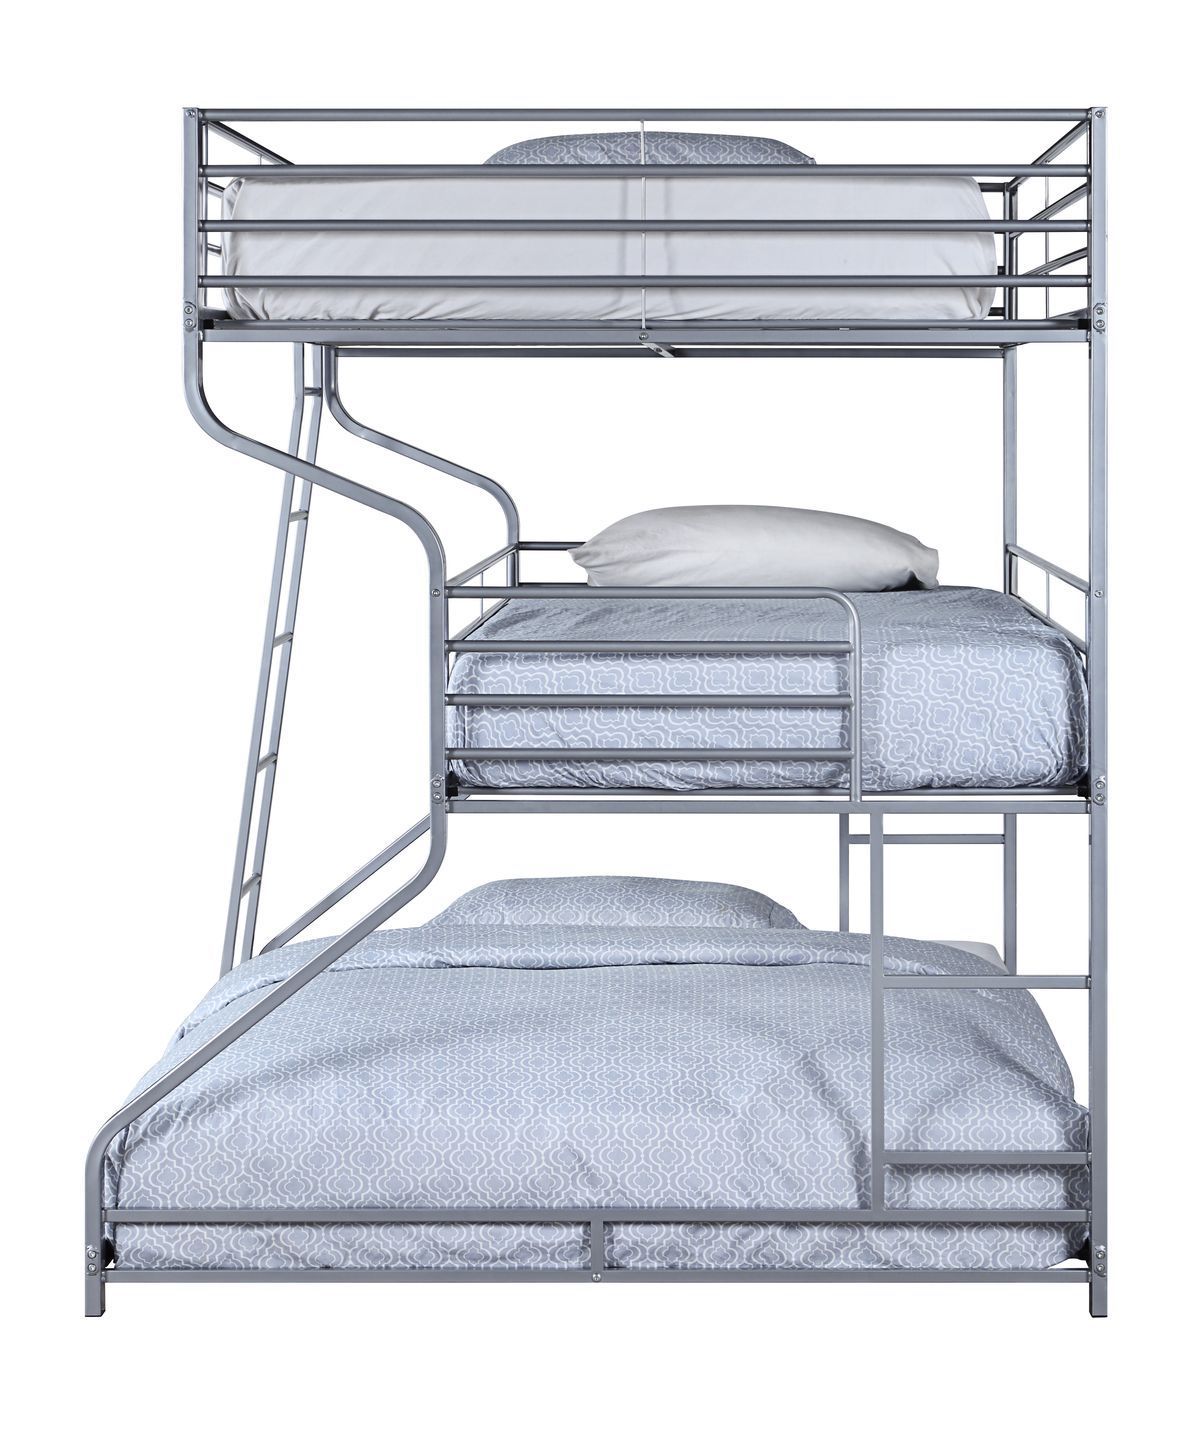 Caius II Triple Bunk Bed - Twin, Full Over Queen - Space Saver - Silver